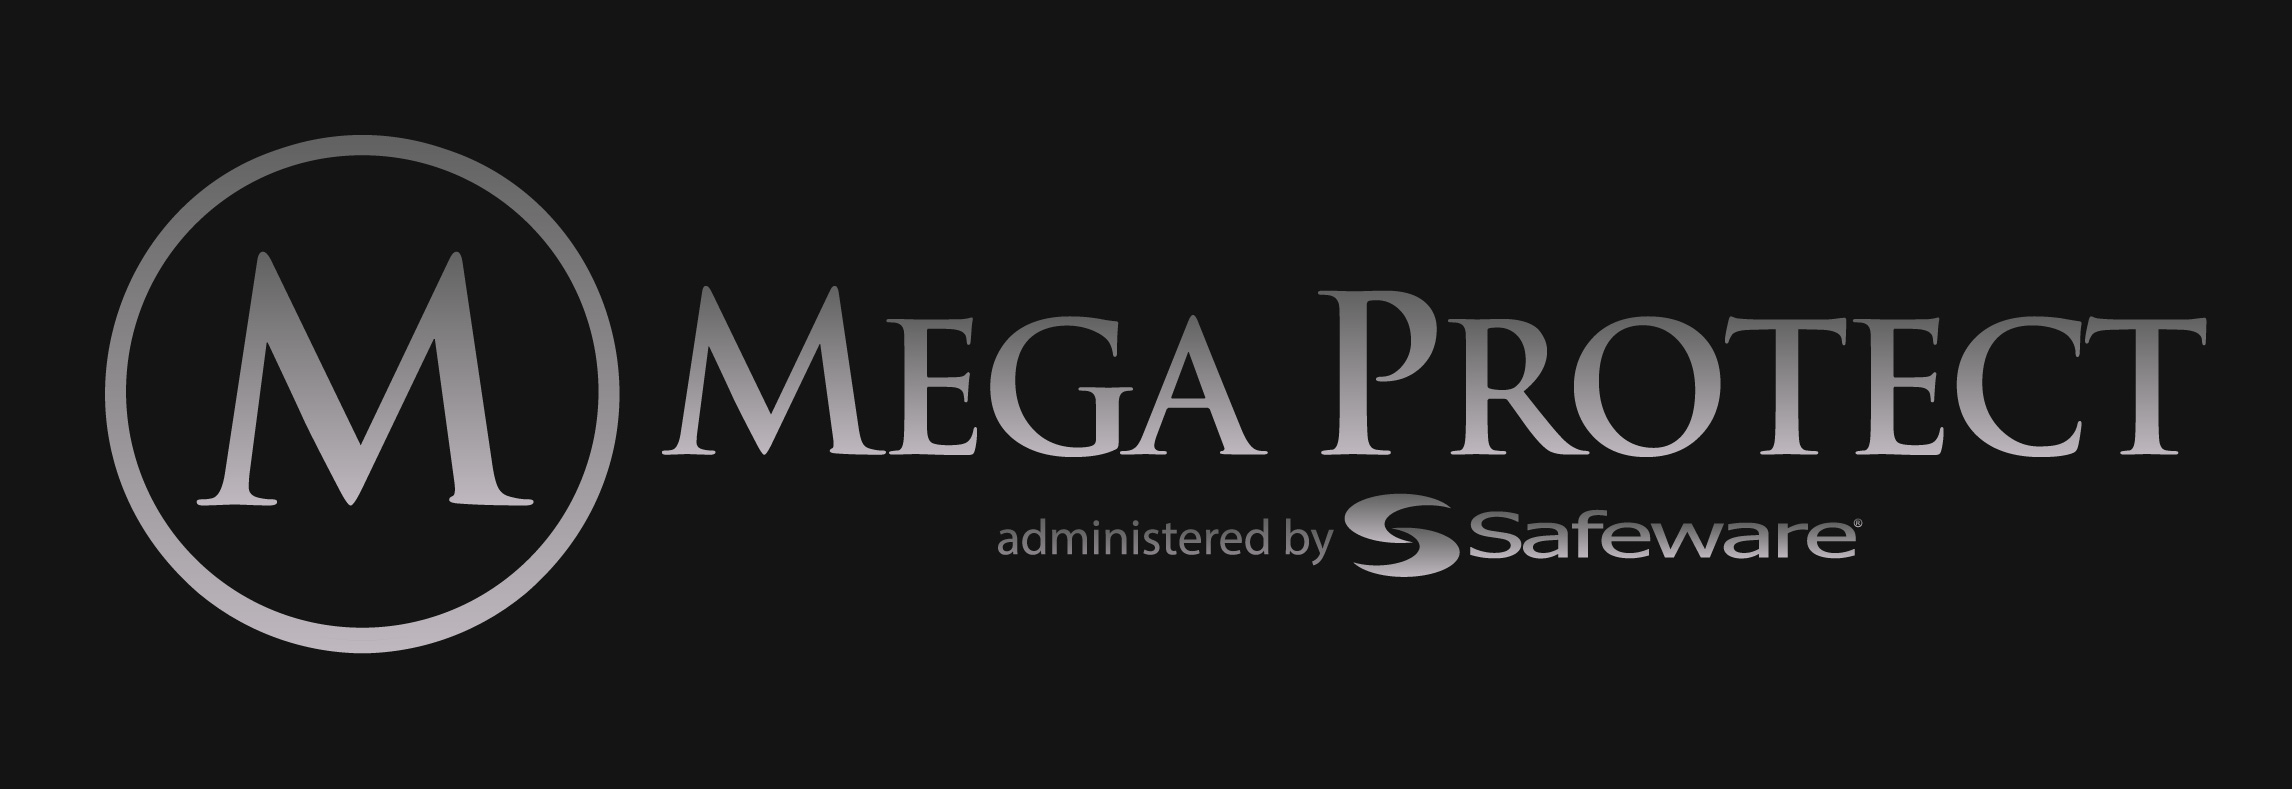 "MEGA Protect is white-glove service, advanced technology, and premium protection, all wrapped into one convenient offering."